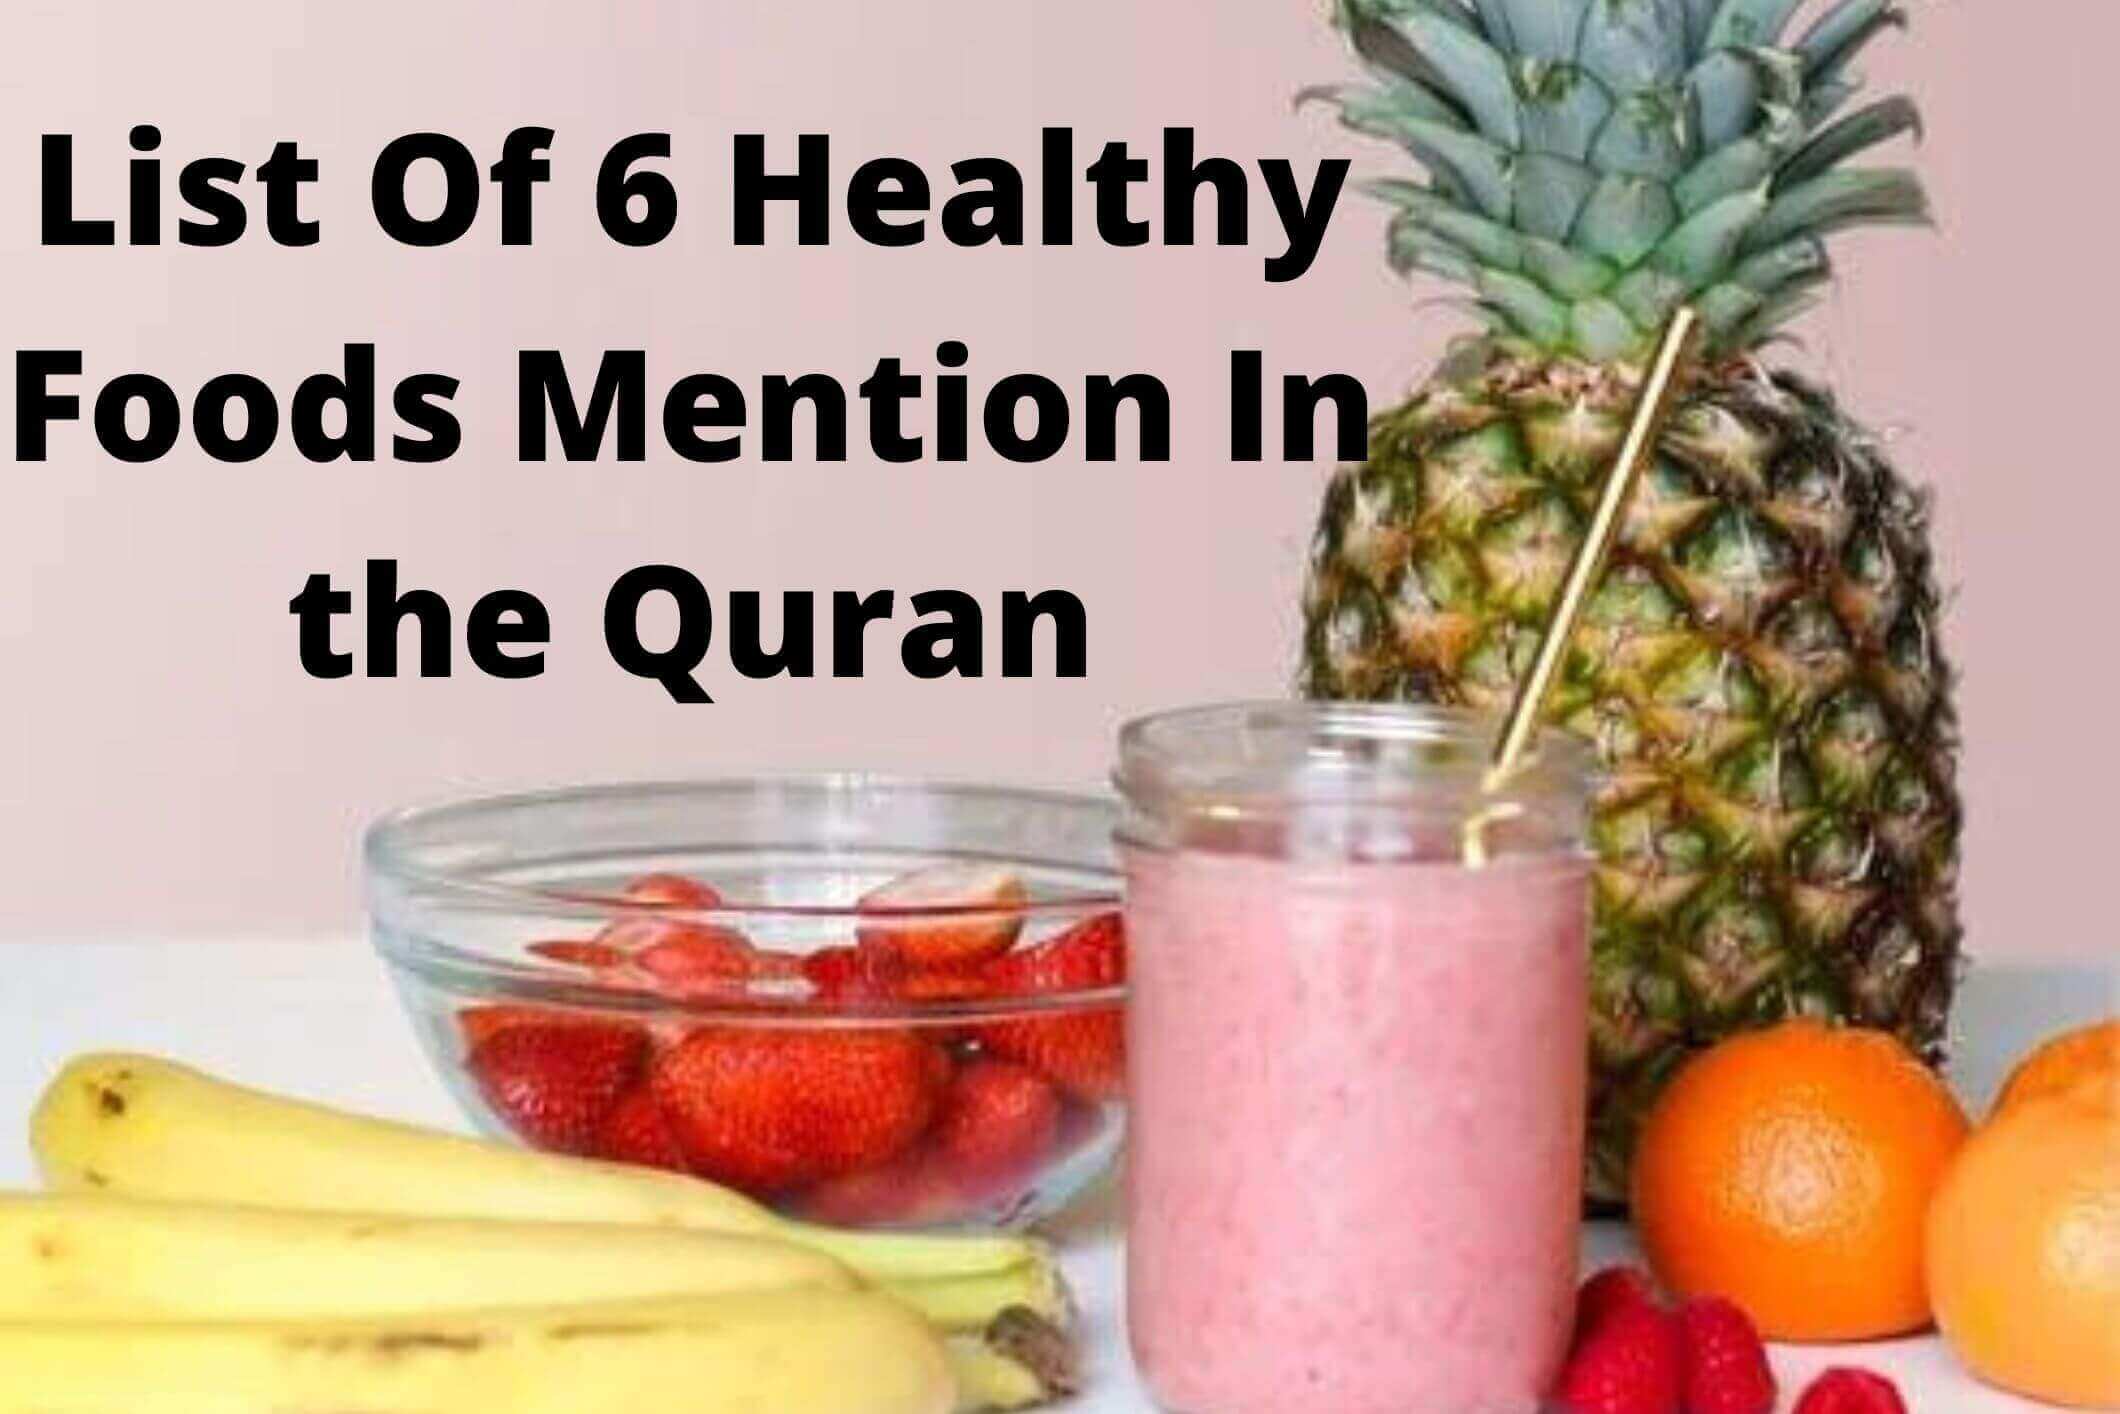 List Of 6 Healthy Foods Mention In the Quran